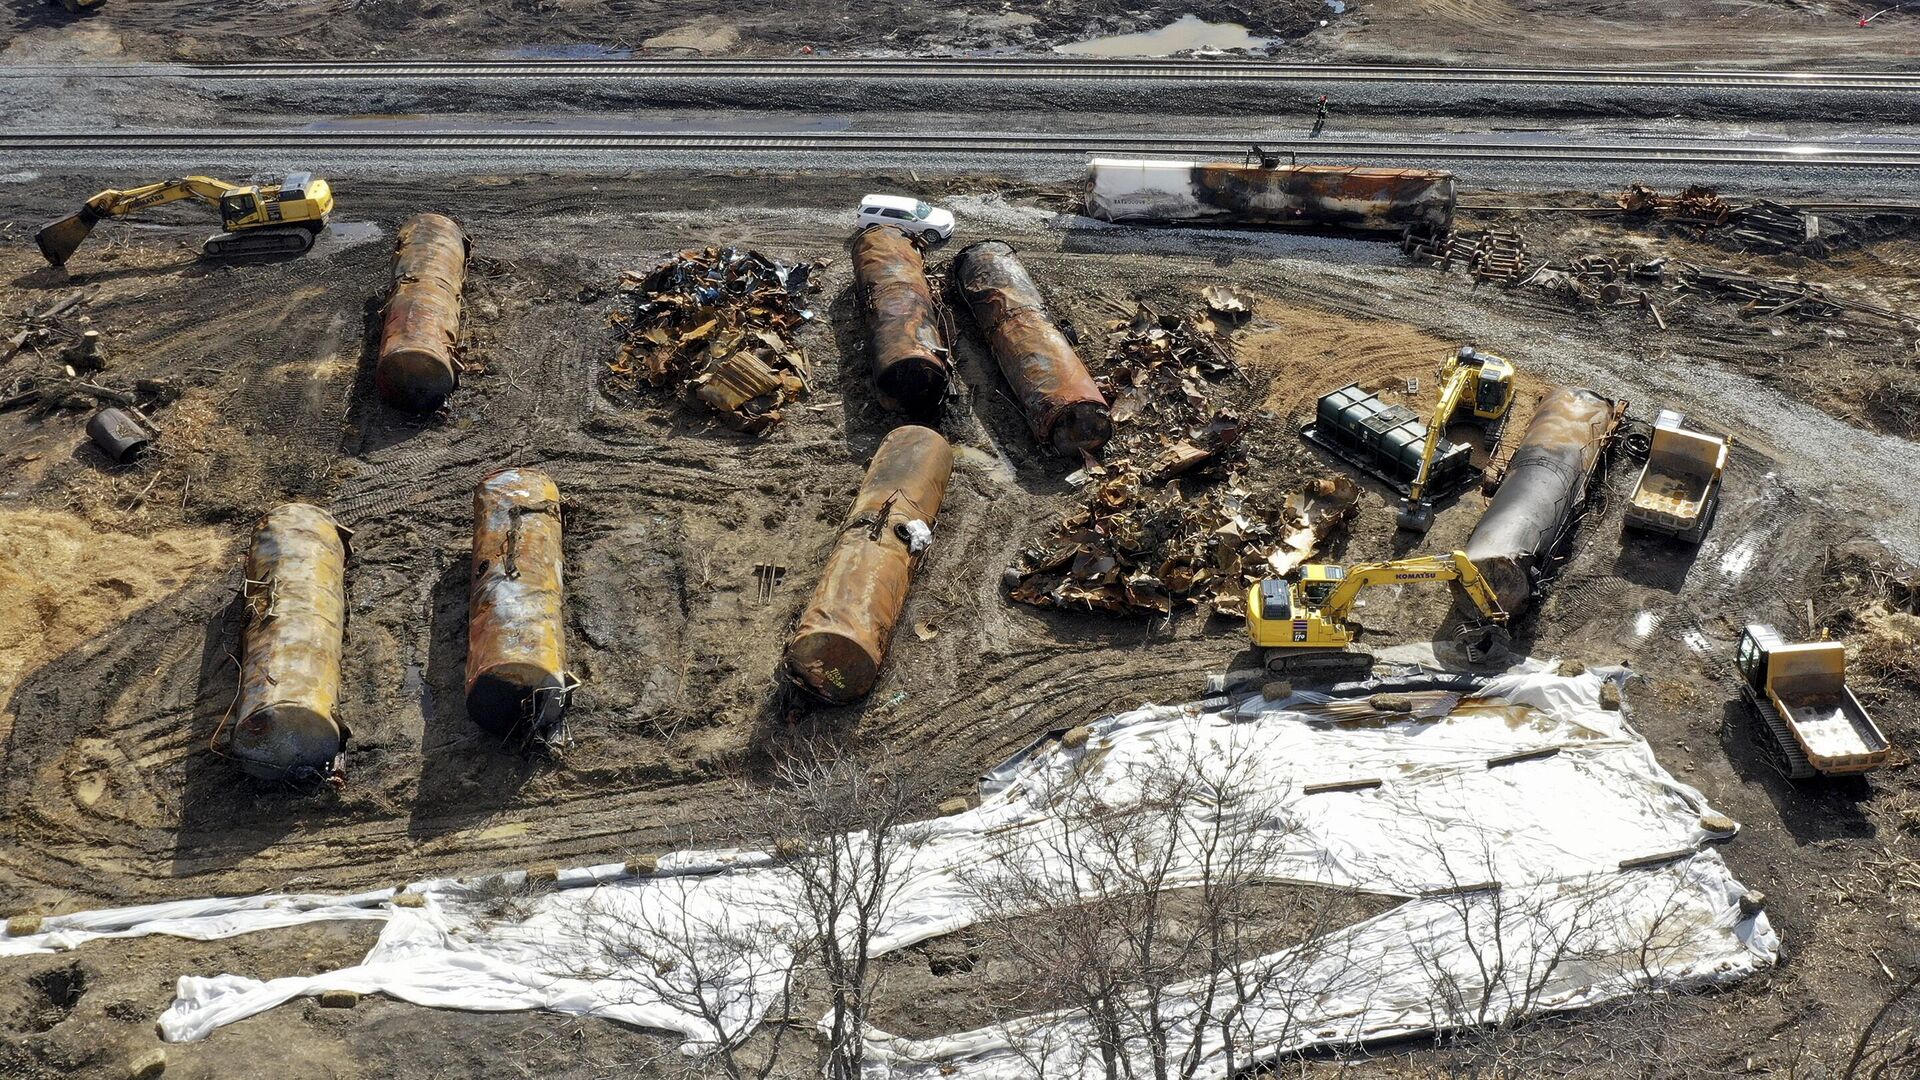 A view of the scene Friday, Feb. 24, 2023, as the cleanup continues at the site of of a Norfolk Southern freight train derailment that happened on Feb. 3 in East Palestine, Ohio - Sputnik International, 1920, 31.03.2023